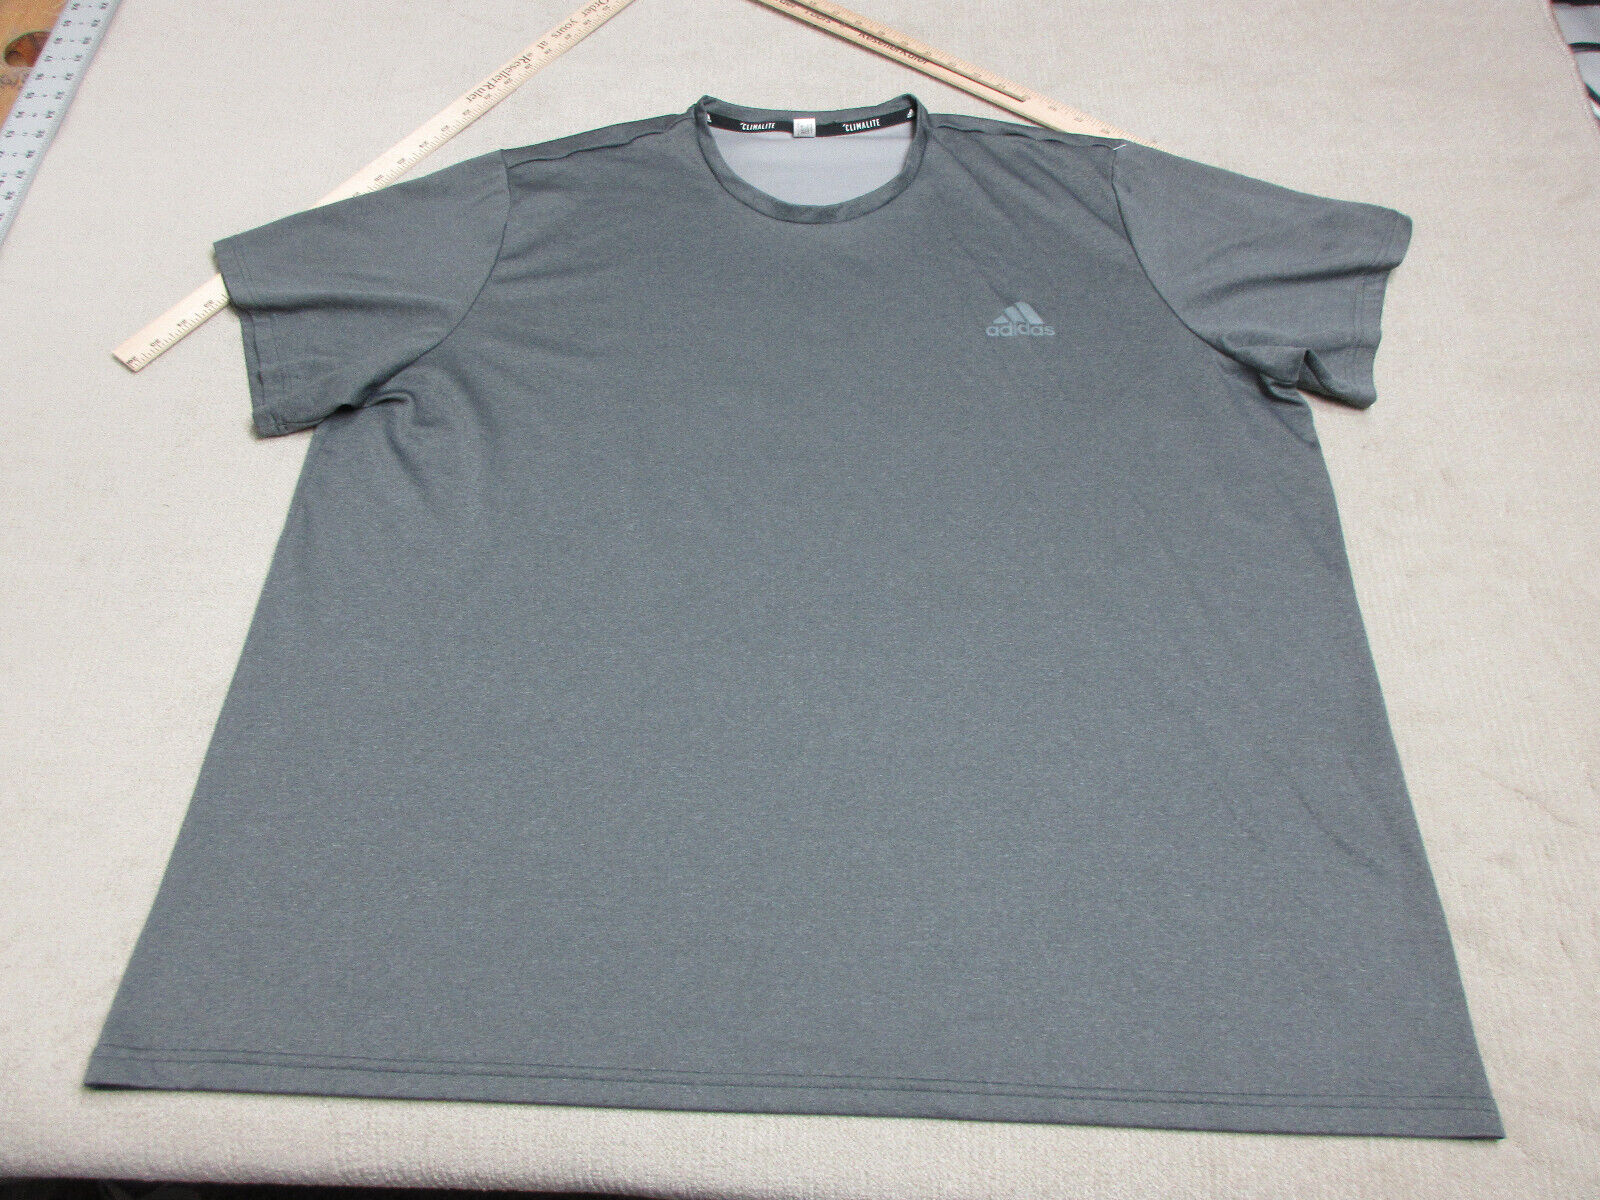 Adidas Shirt Adult 3XL Gray Short Sleeve Solid Athletic Stretch Climalite  Mens